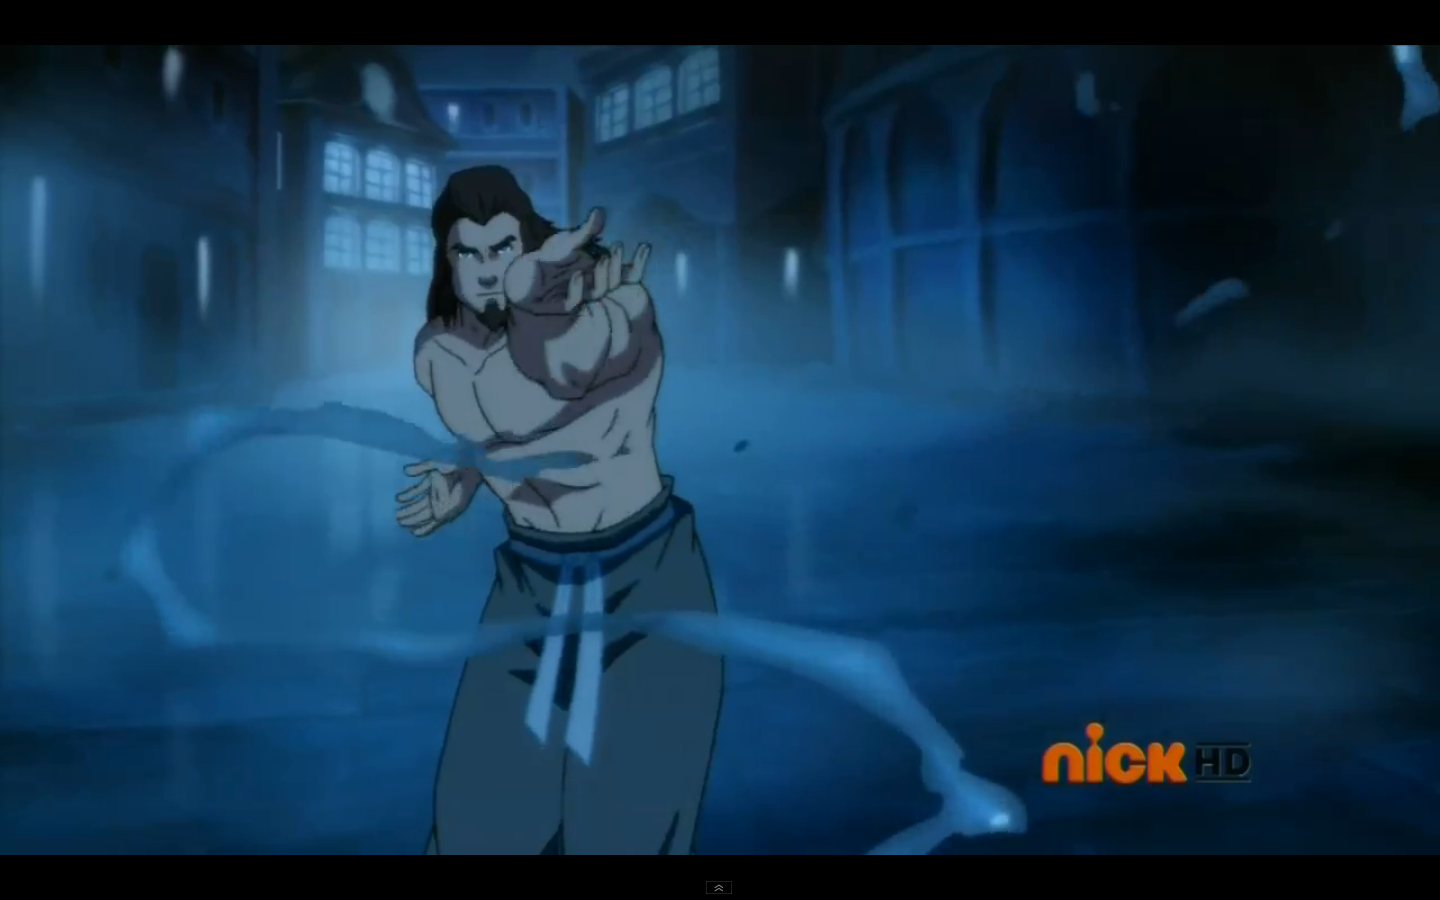 But mostly, I was distracted by shirtless Tonraq. What can I say? I'm only human.